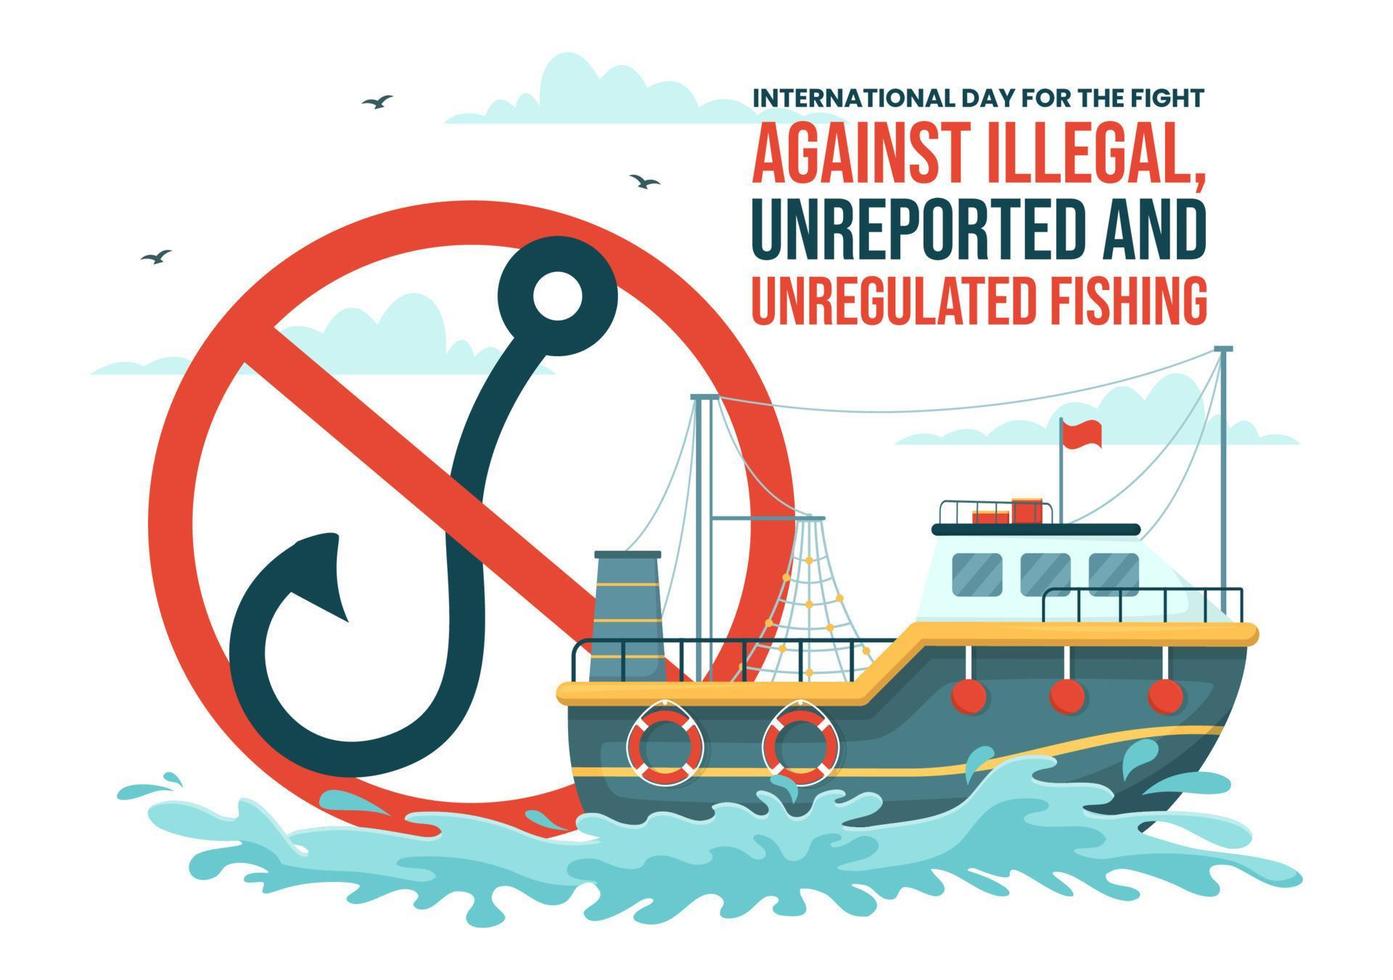 International Day for the Fight Against Illegal, Unreported and Unregulated Fishing Vector Illustration with Rod Fish in Flat Hand Drawn Templates